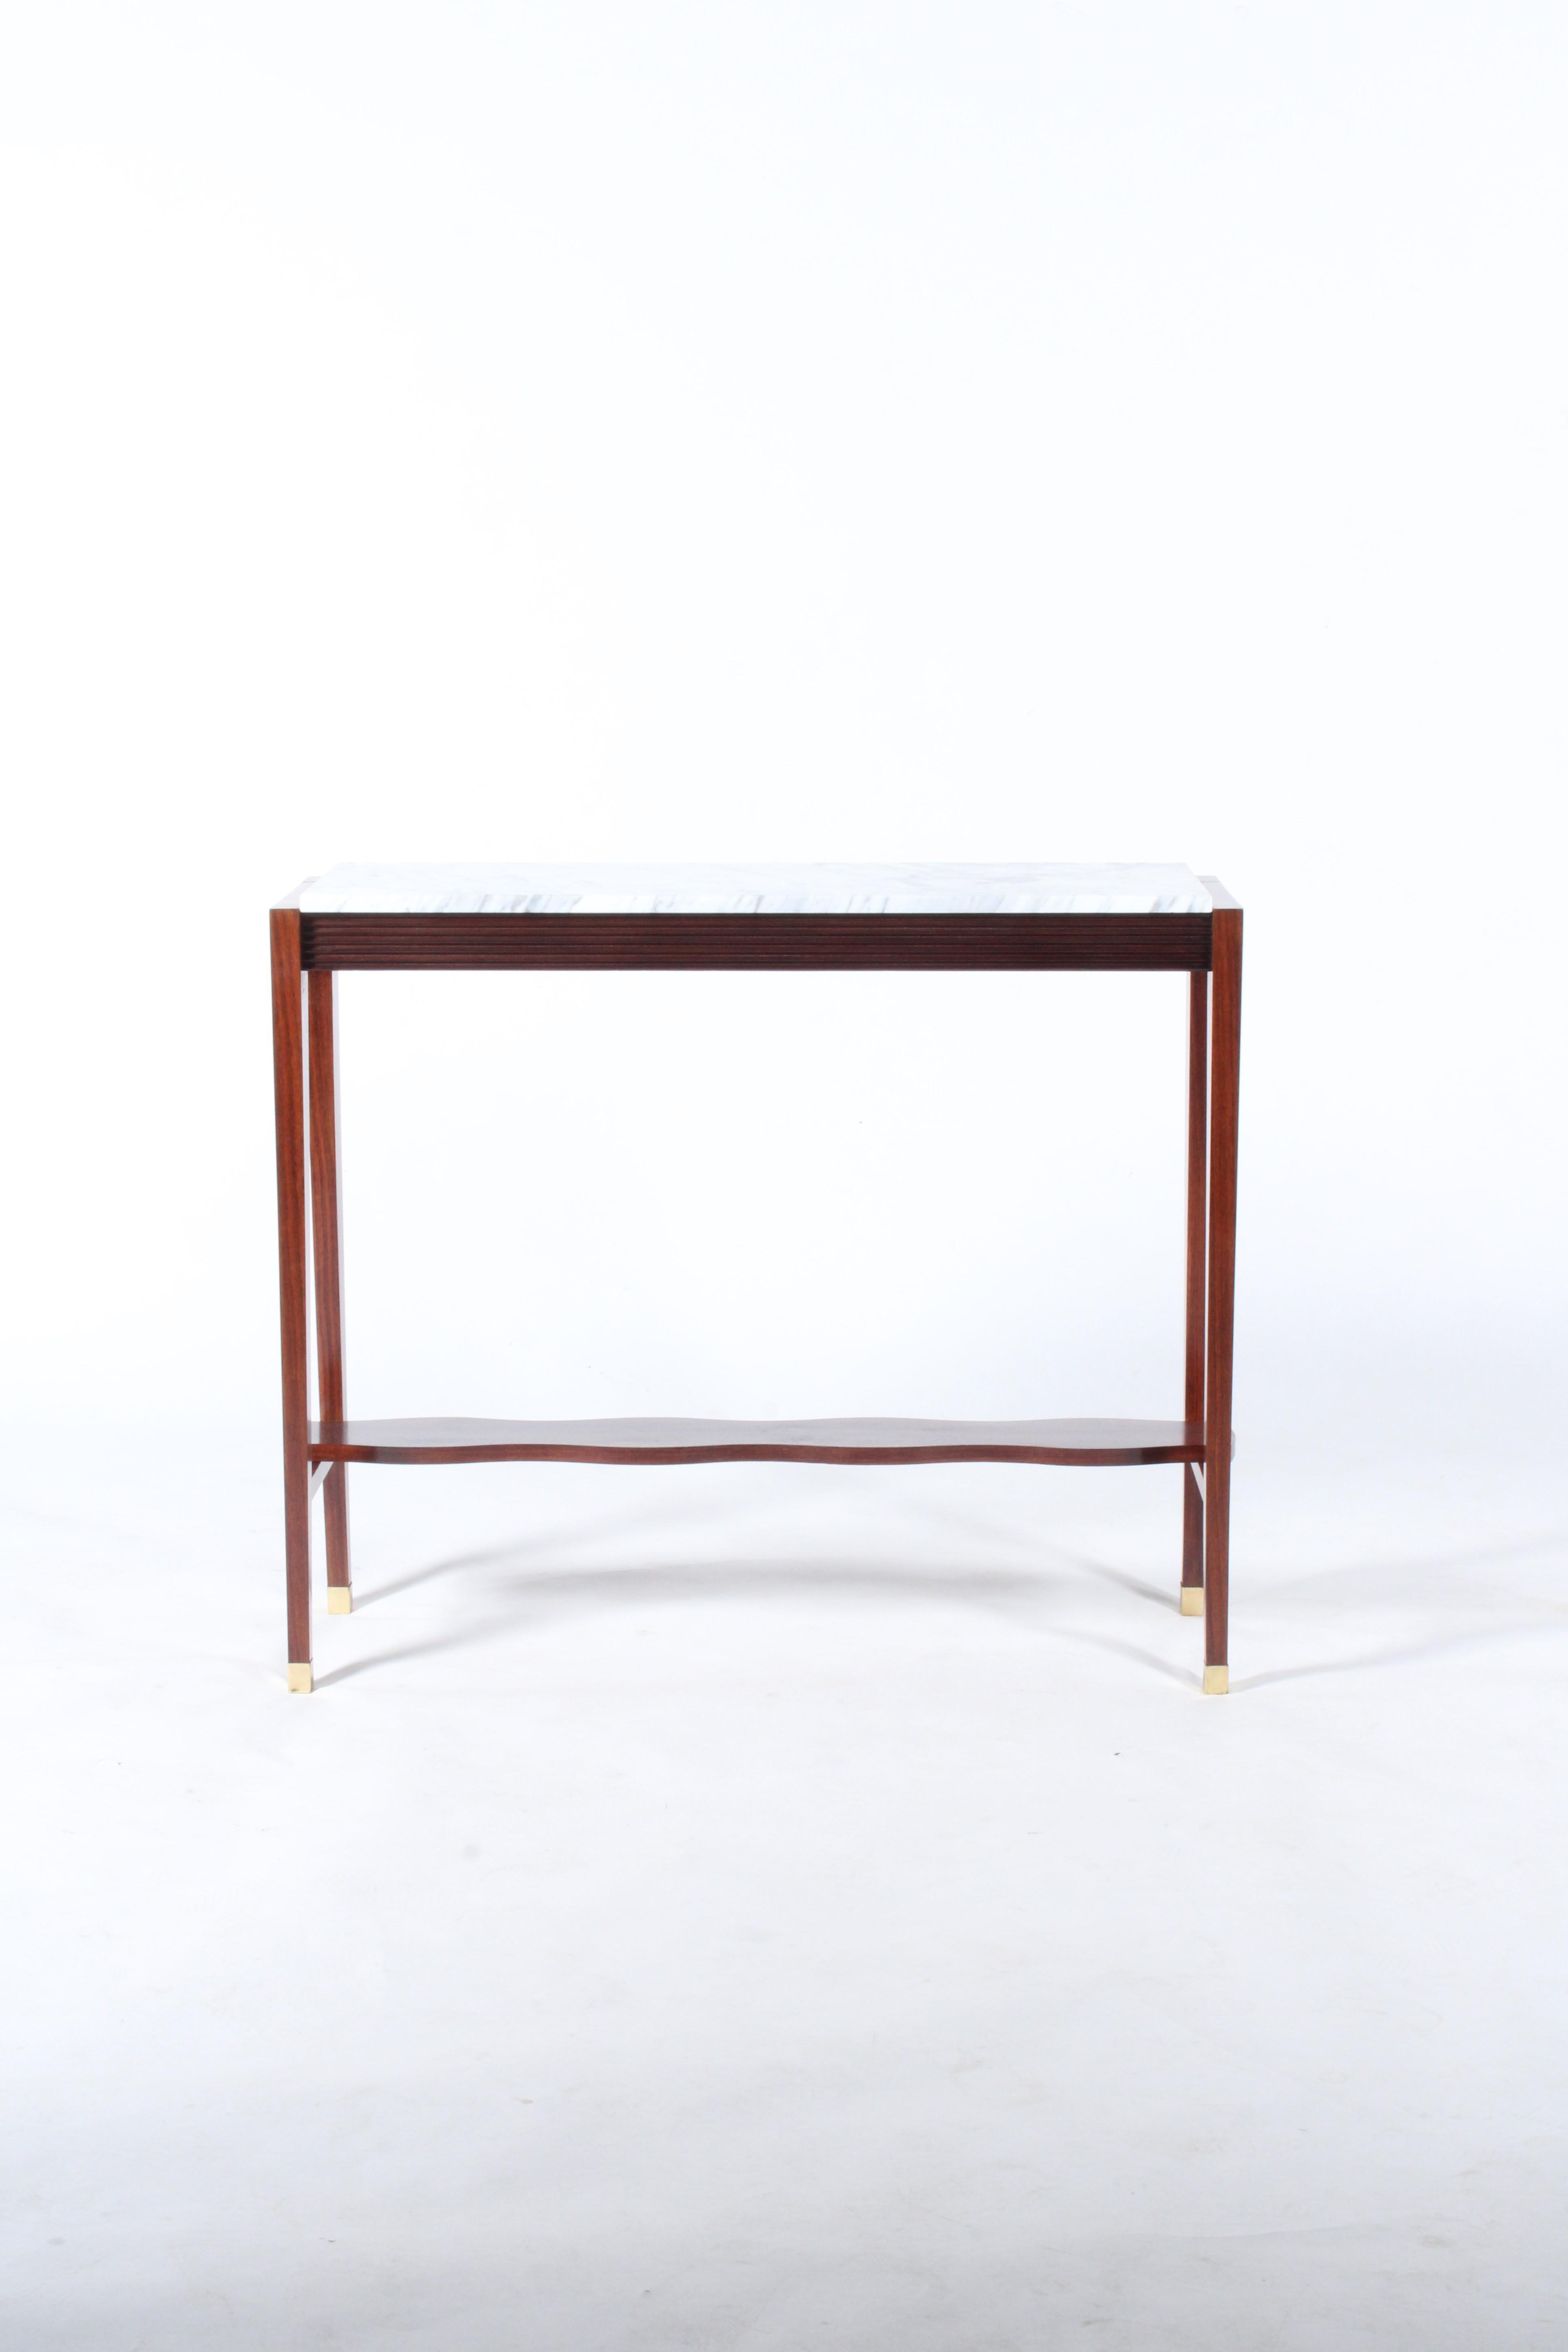 A simple yet beautiful mid century Italian console table in a gorgeous deep grained rosewood with marble top and brass detailing. A curving shelf to the base contrasts perfectly with the slick clean lines of the piece. Please see our additional